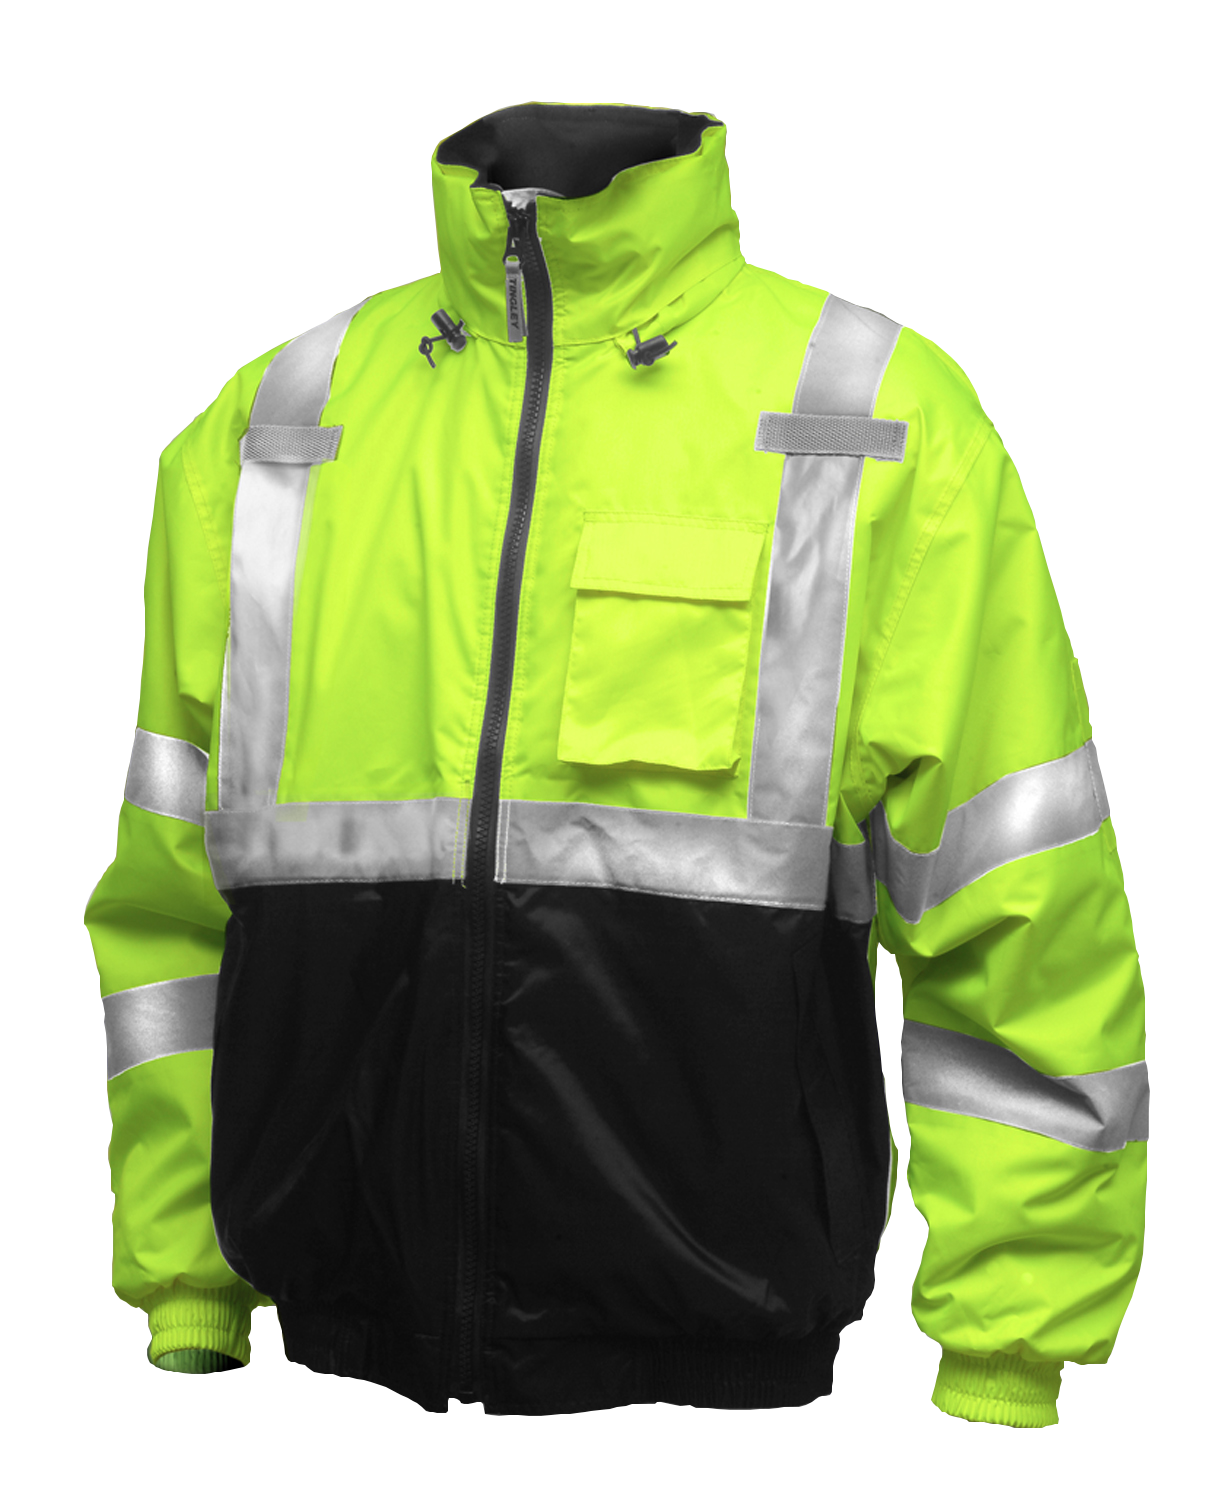 Bomber II™ Jacket - Type R Class 3 - Fluorescent Yellow-Green-Black - Silver Reflective Tape - Polyester Quilted Liner - Attached Hood-eSafety Supplies, Inc